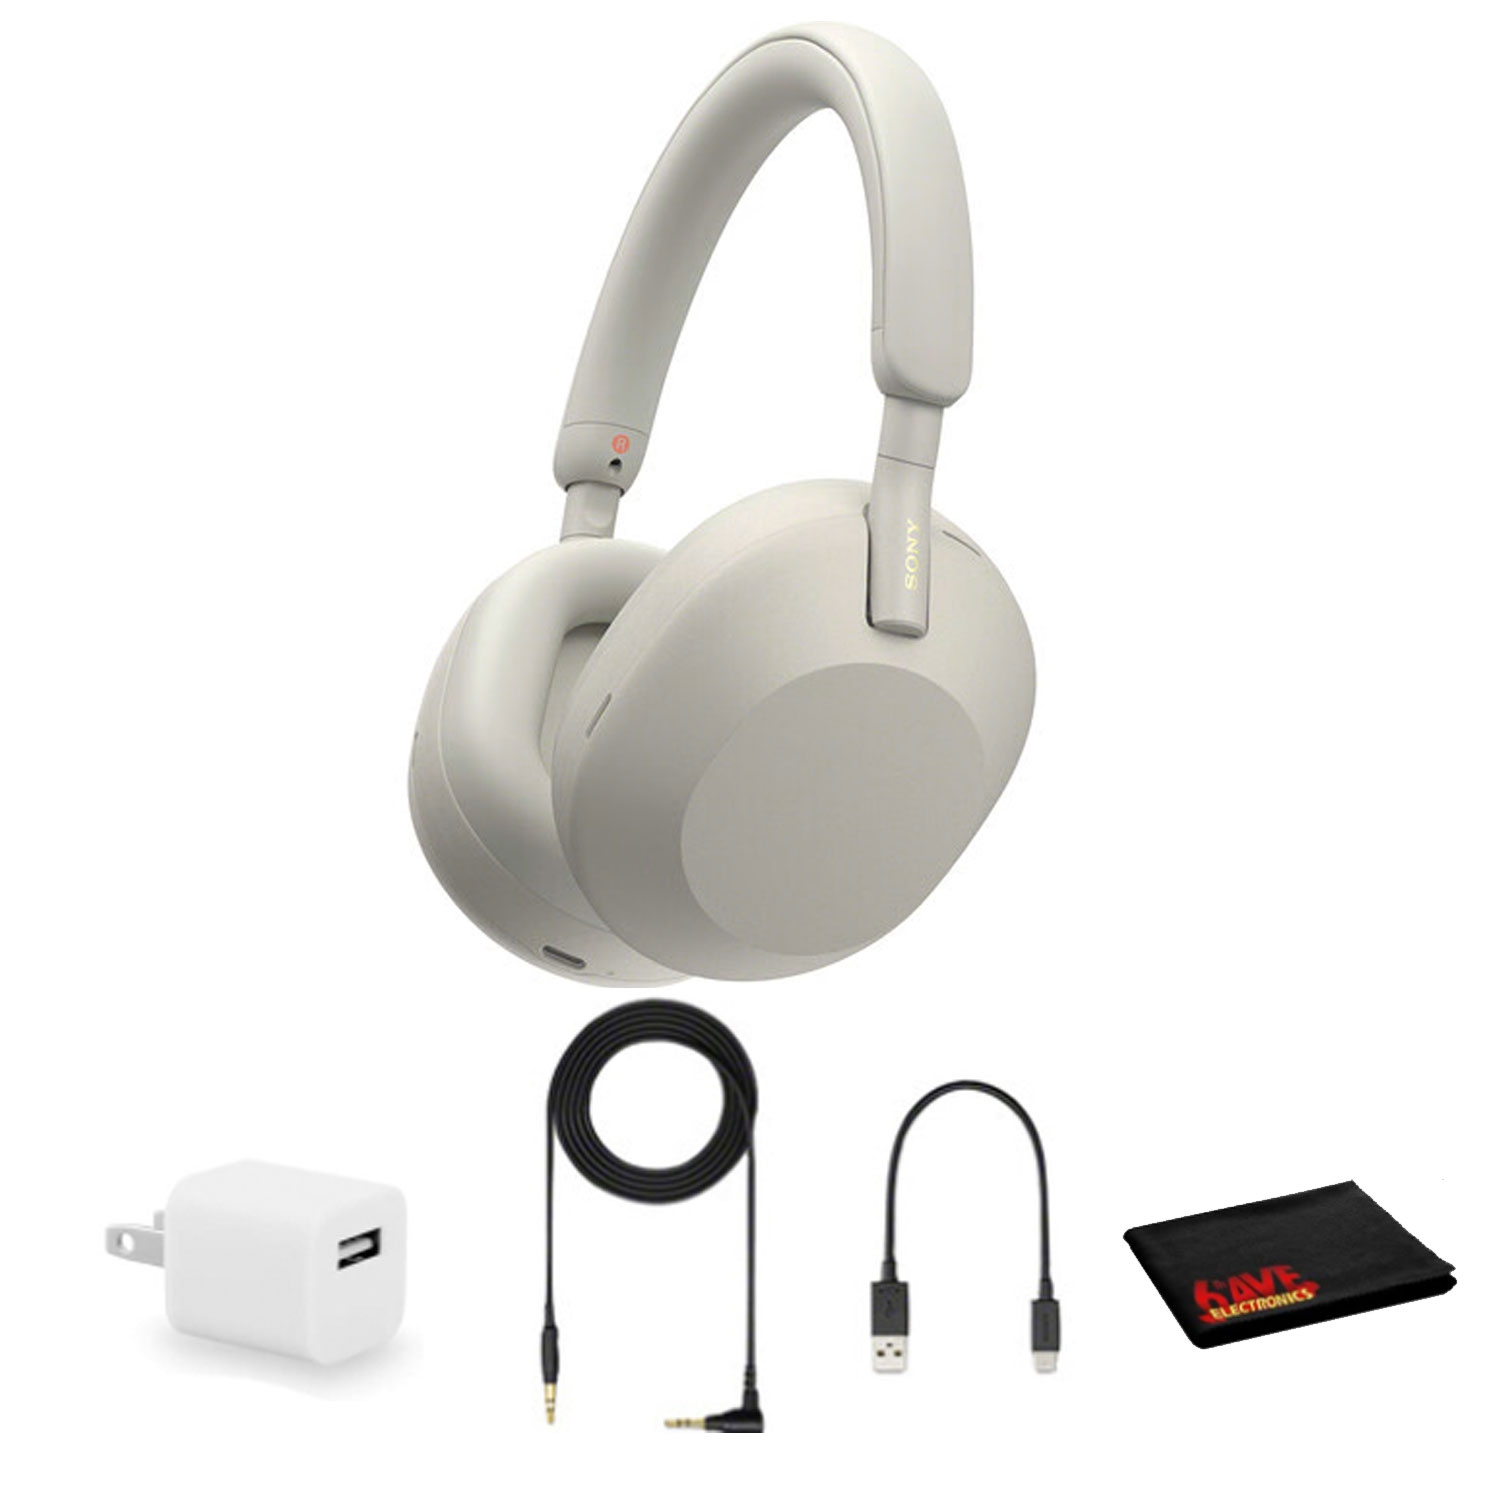 Sony WH-1000XM5 Noise-Canceling Wireless Headphones (2-Colors) with Charging Kit